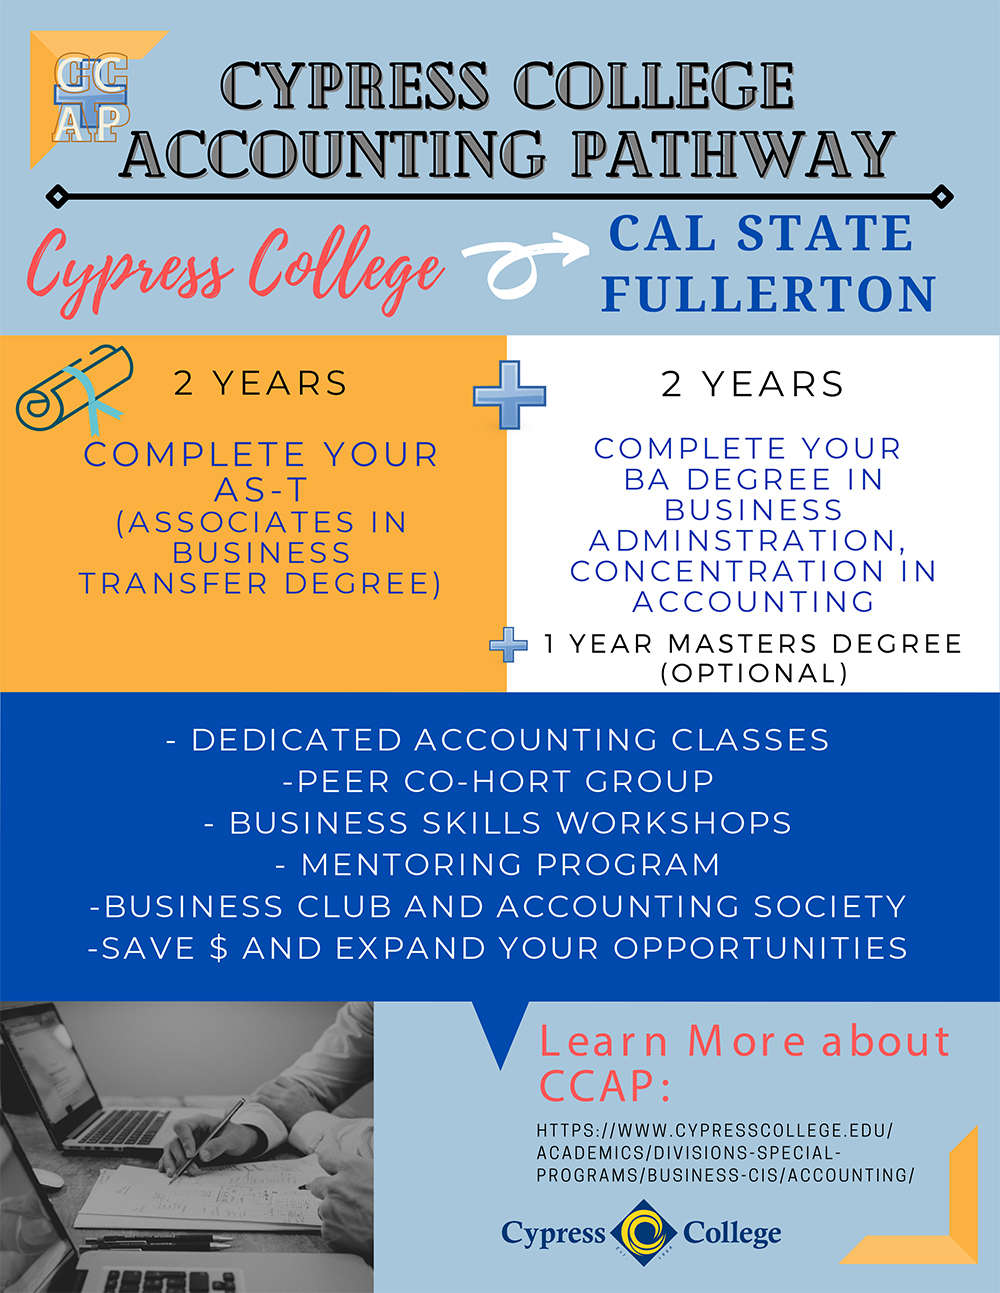 A flyer describing the Cypress College Accounting Pathway Program, featuring information that is shared on this page. 